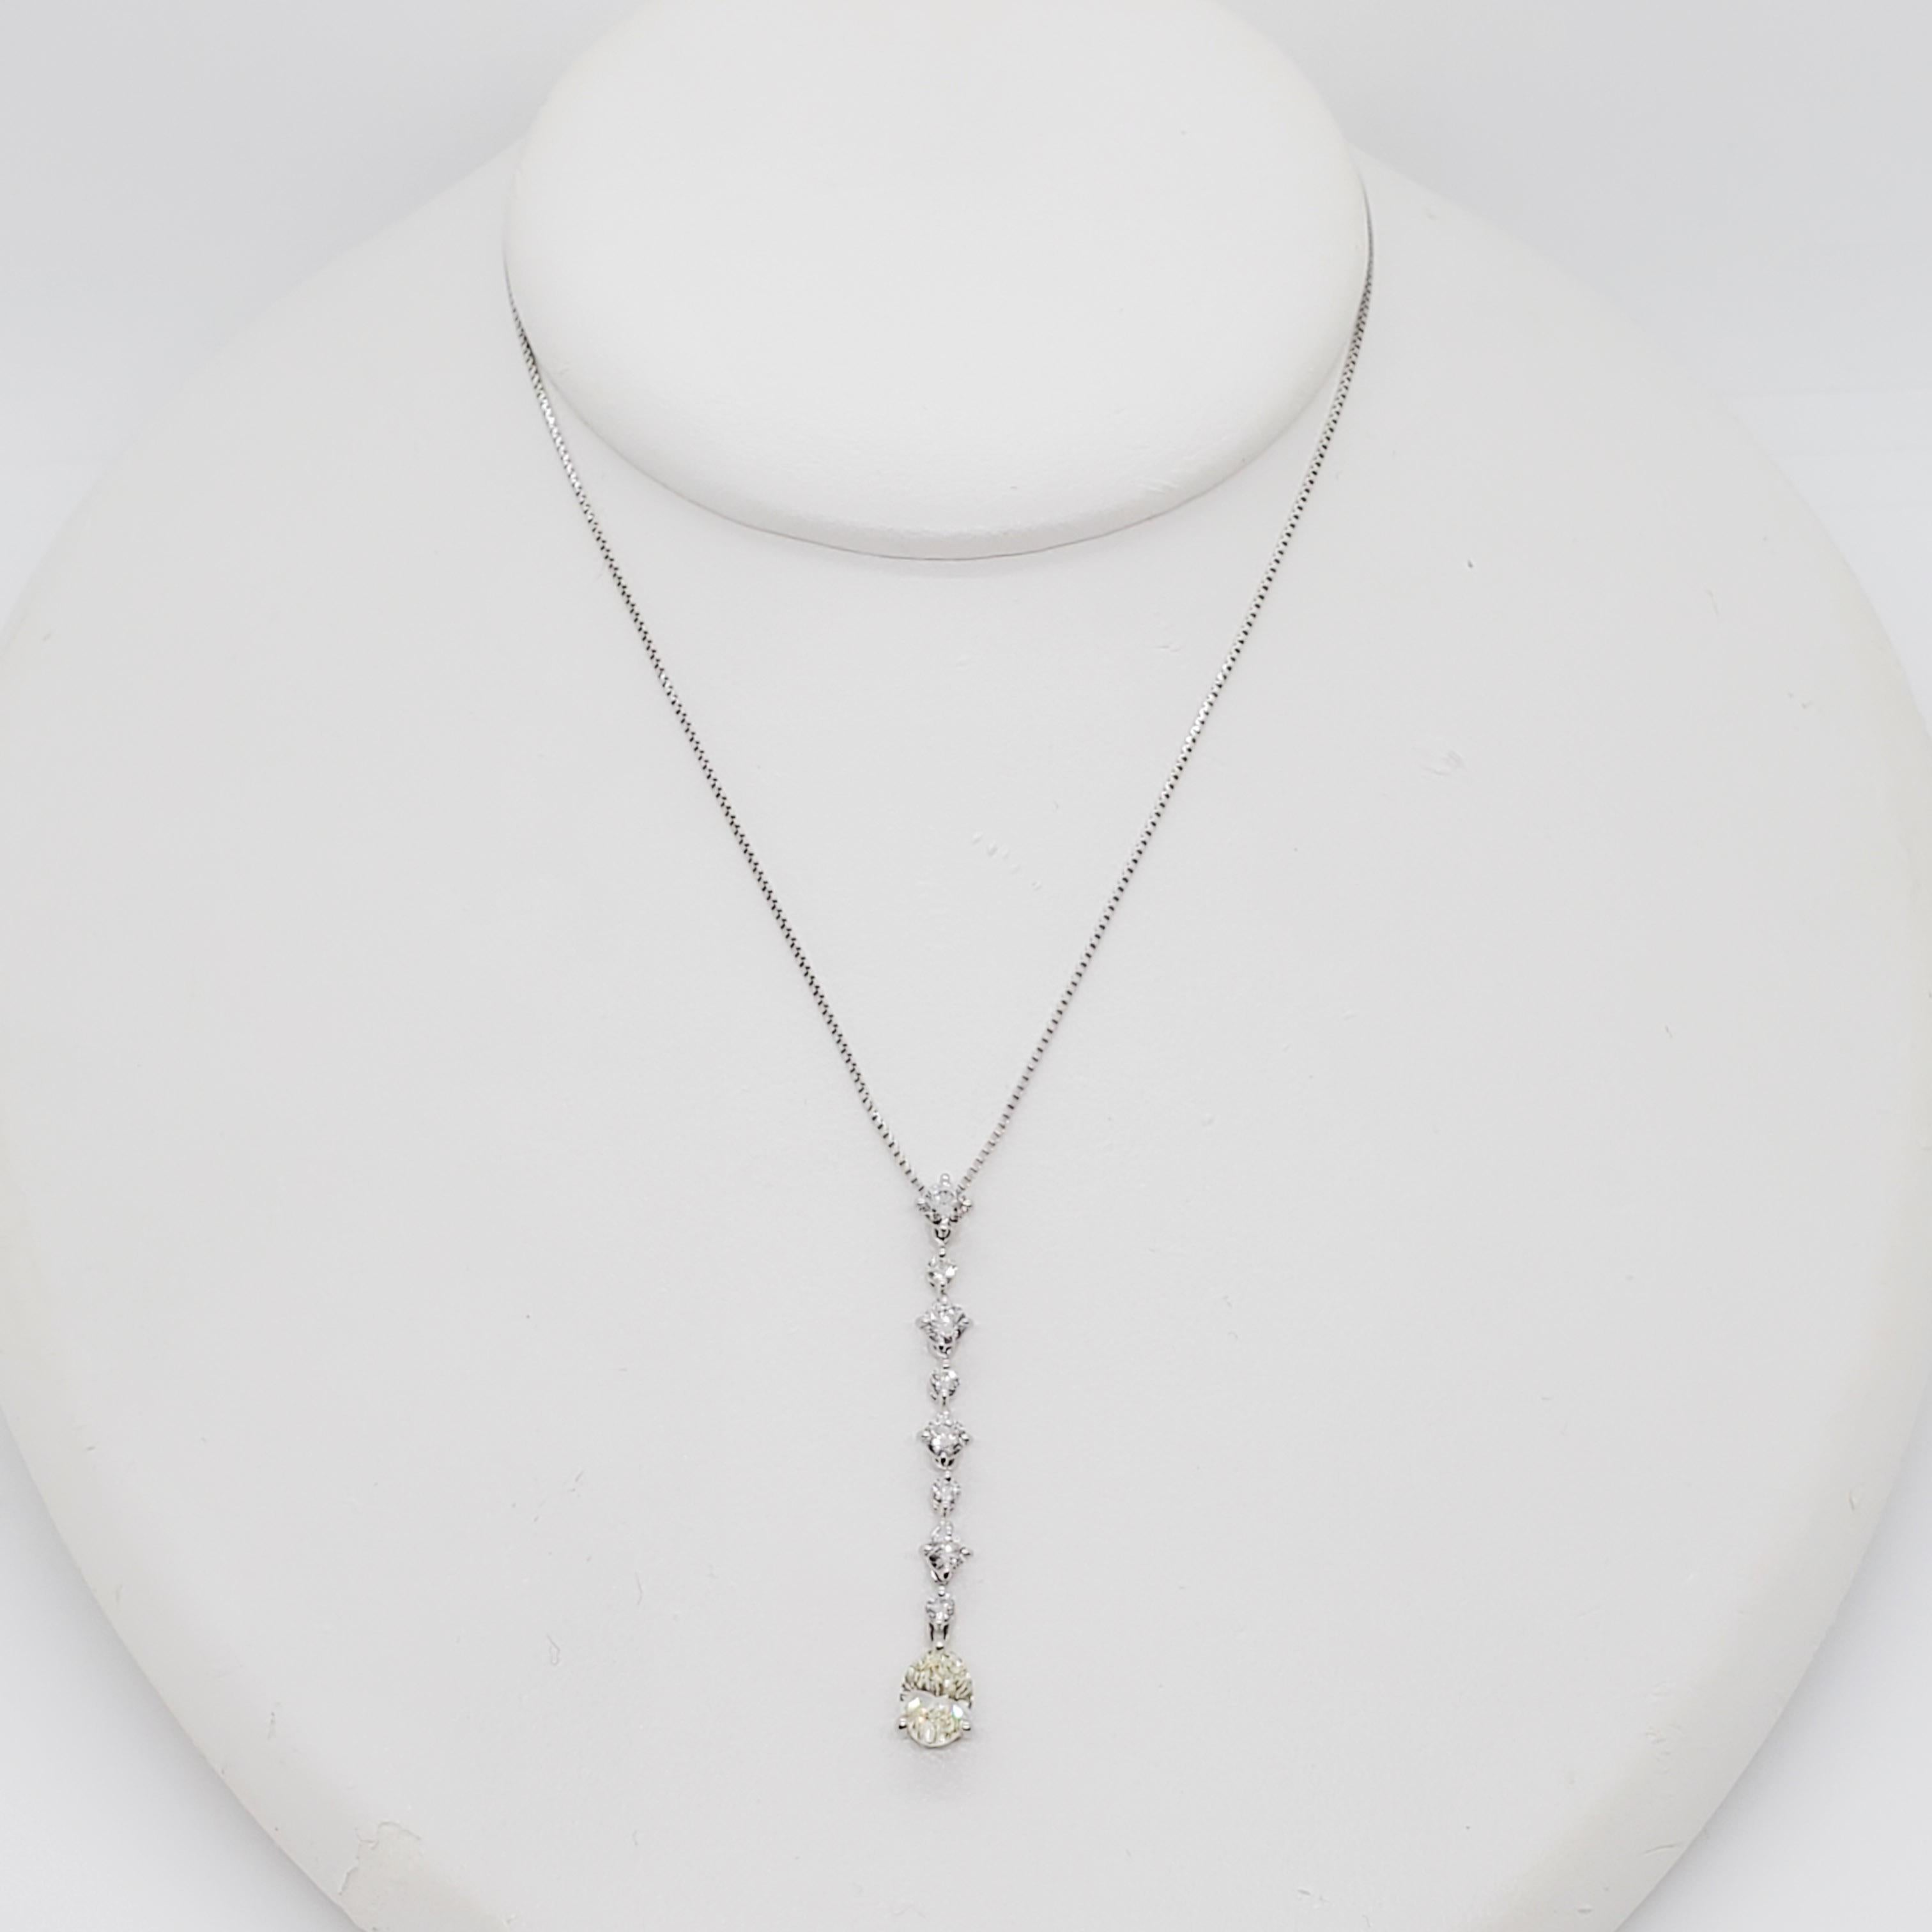 Gorgeous white diamond pendant necklace featuring a 0.76 ct. white diamond oval with 0.60 ct. white diamond rounds in a handmade platinum mounting and chain.  Perfect for everyday or a formal occasion. Mint condition.